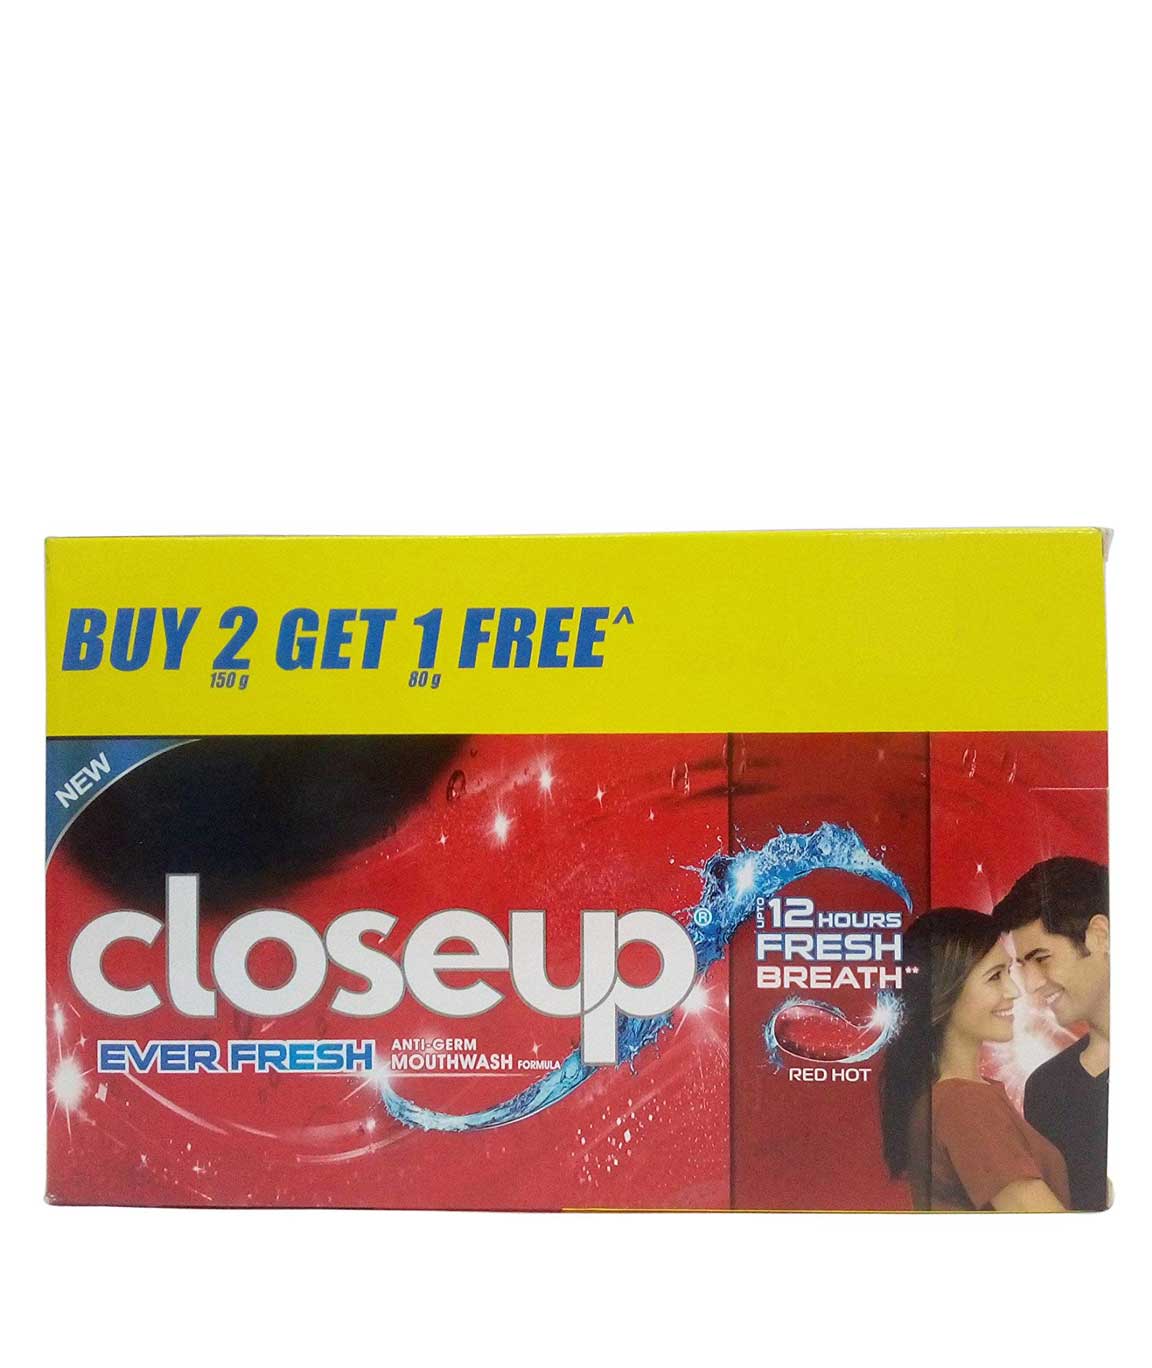 Closeup Ever Fresh Toothpaste - Red Hot, 380gm Promo Pack